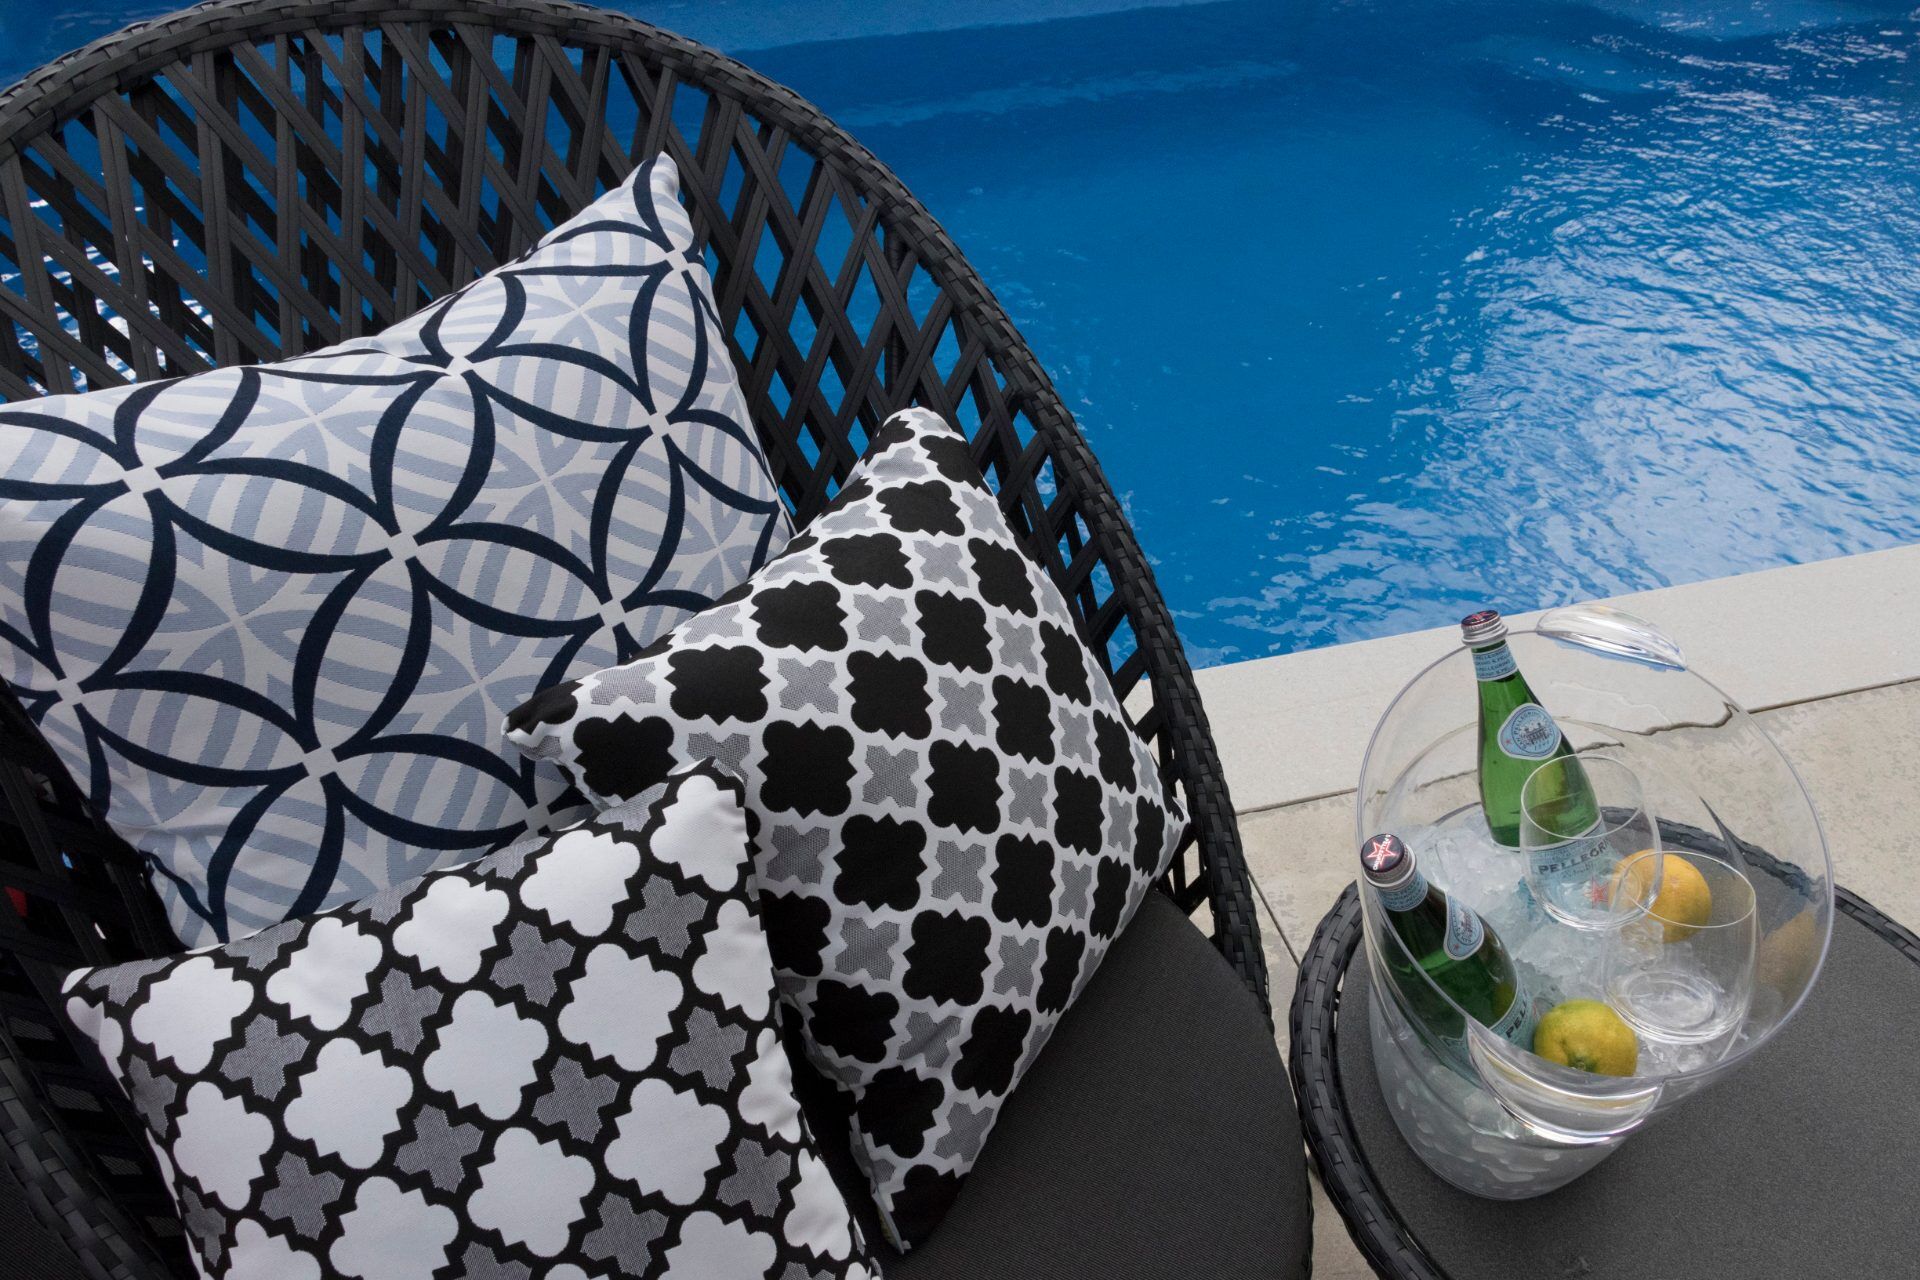 Cushions on Chair by the Pool